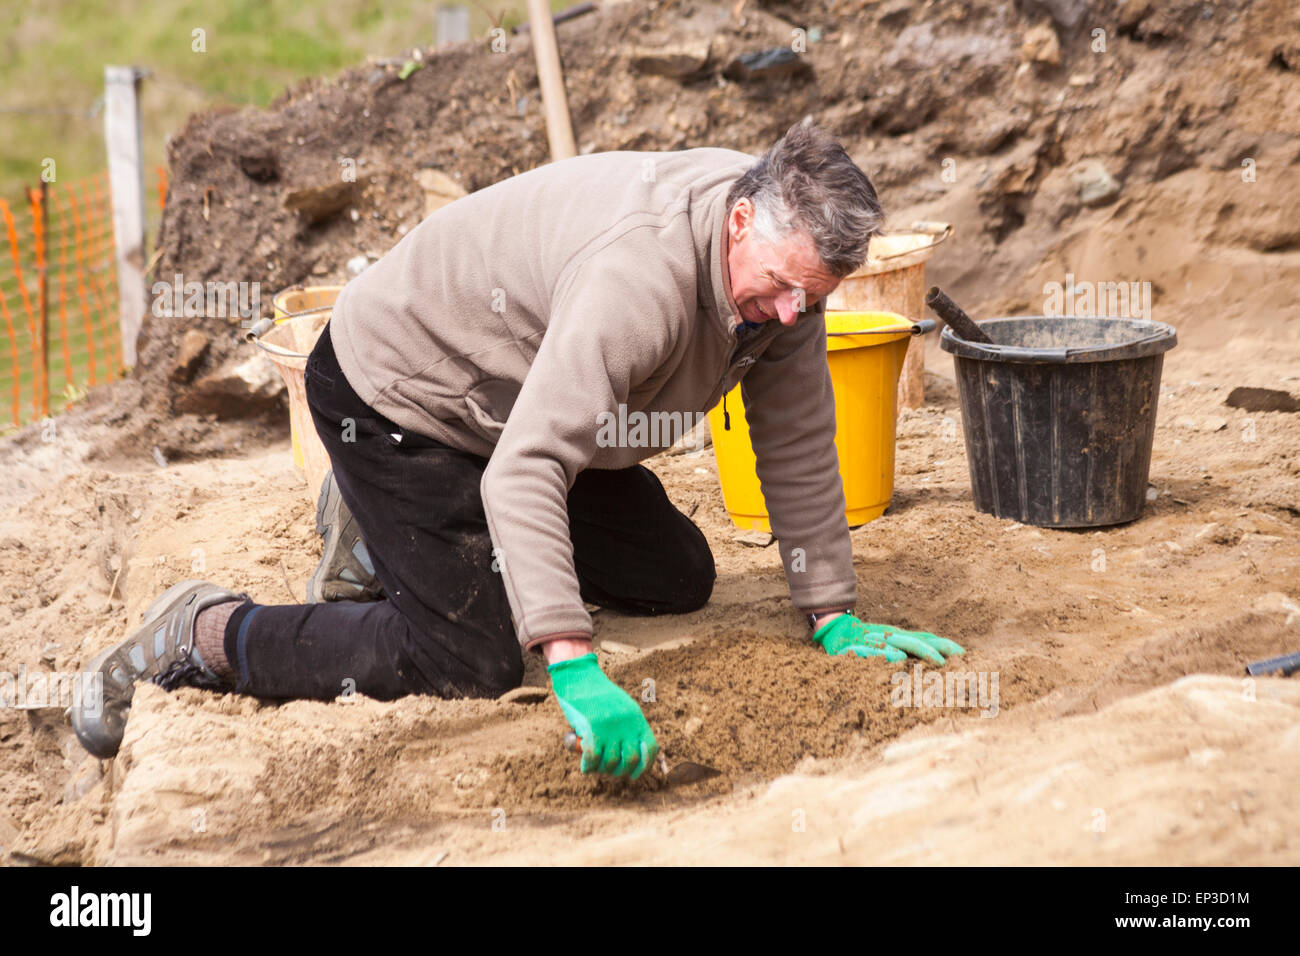 Excavation works at Whitesands Bay, Pembrokeshire Coast National Park, Wales UK in May - man with trowel excavating Stock Photo